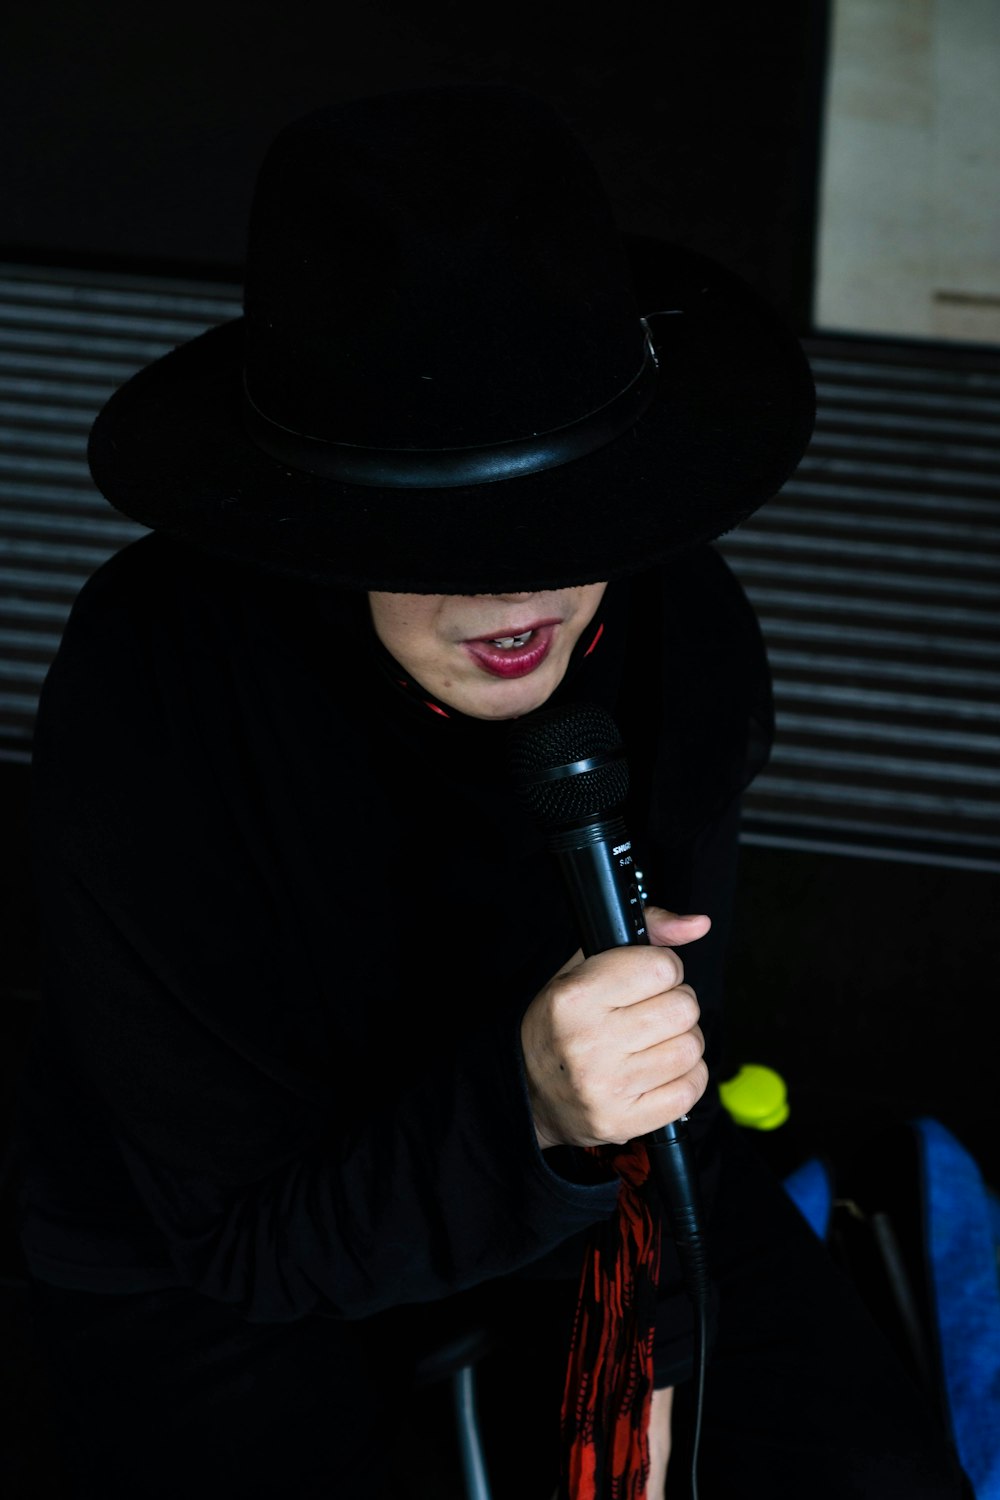 man in black hat holding microphone